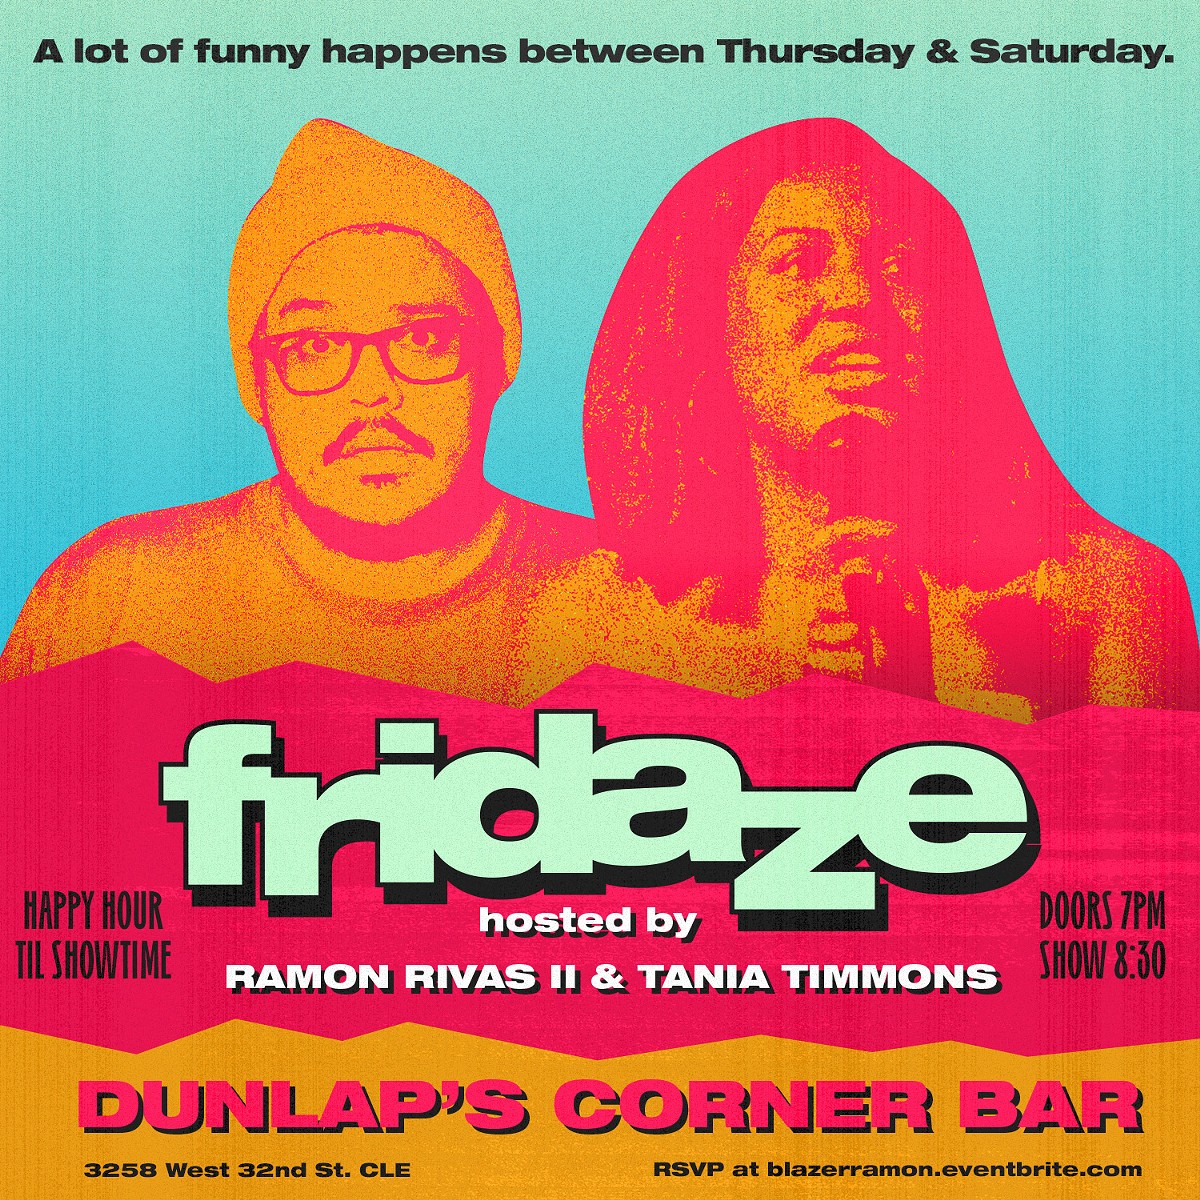 FRIDAZE is a great place for community every week.